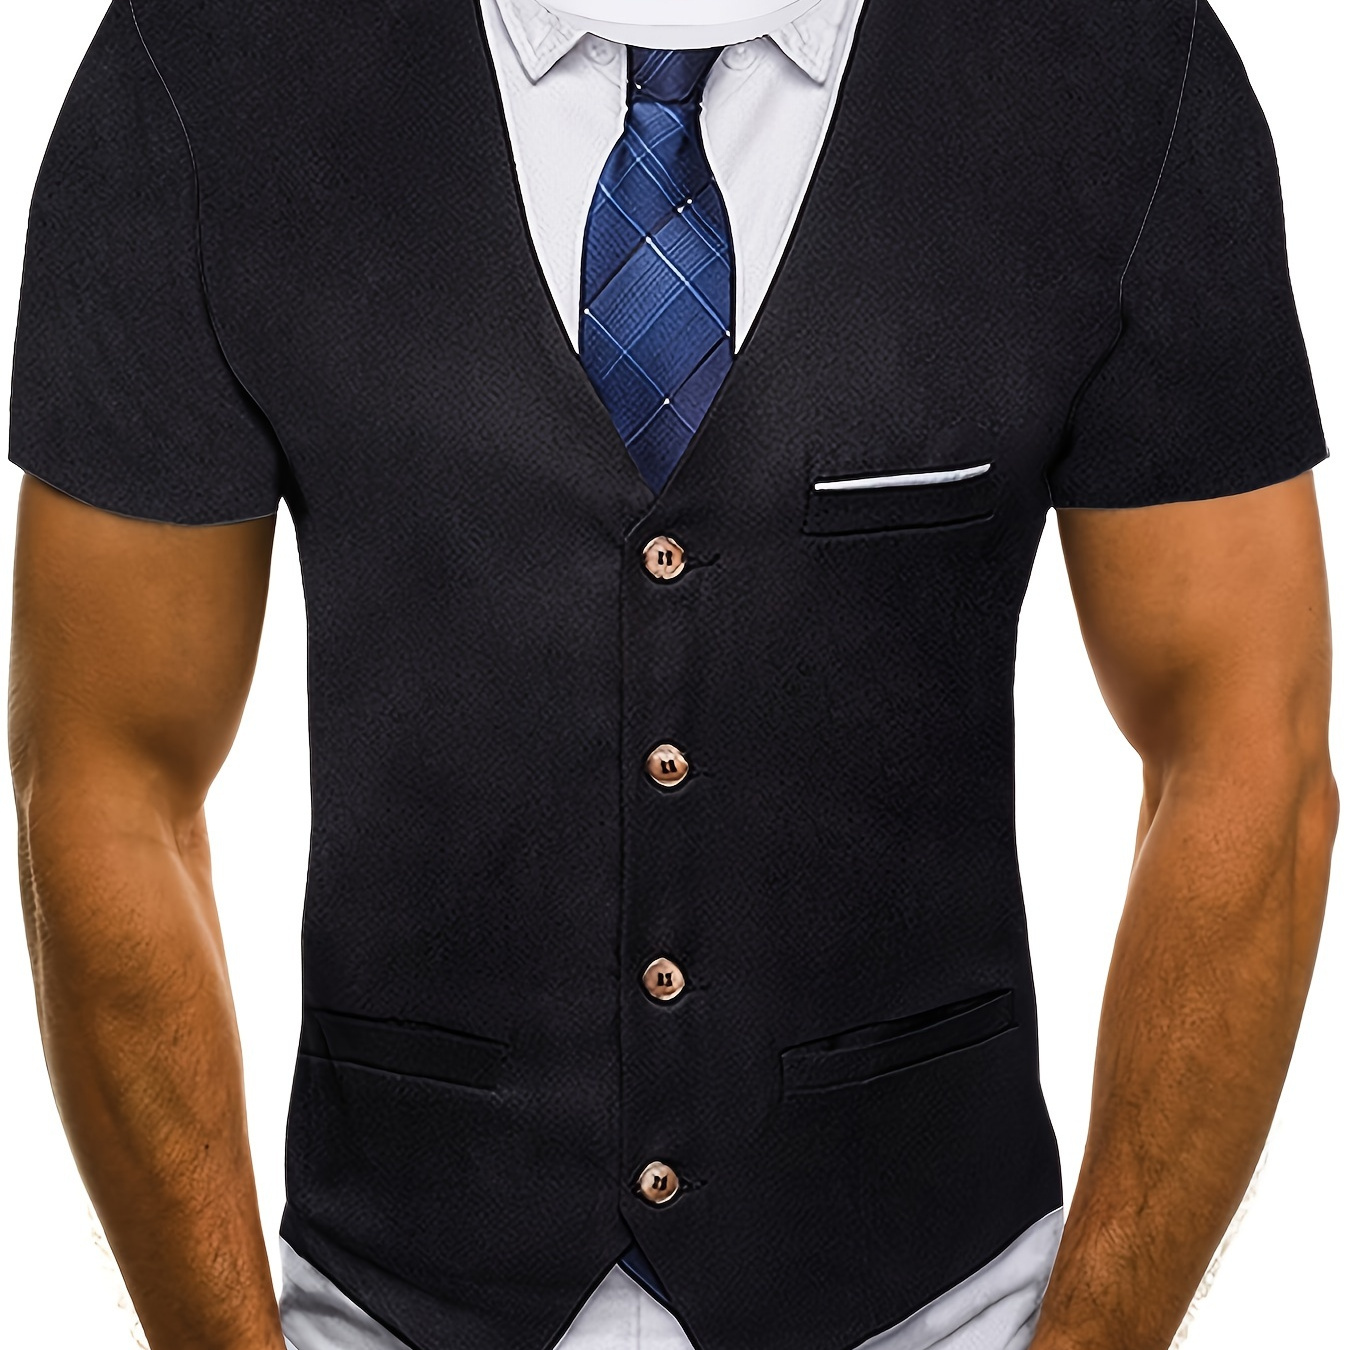 

Men's Casual Summer Short Sleeve T-shirt With Faux Tie And Vest Print, Novelty Tee, Fashionable Top, Comfort Fit